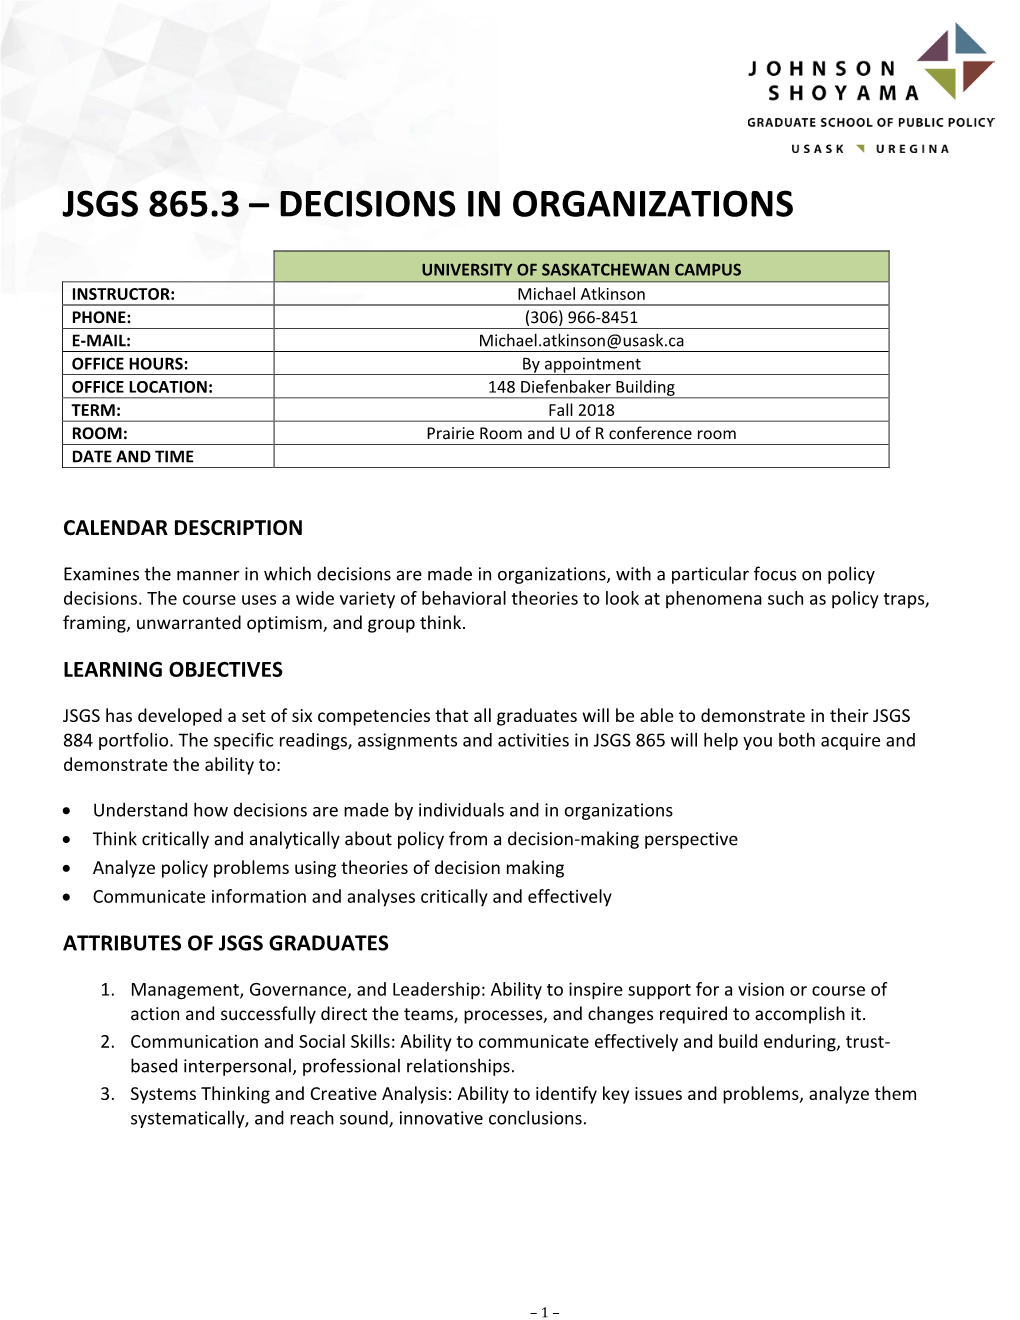 Jsgs 865.3 – Decisions in Organizations